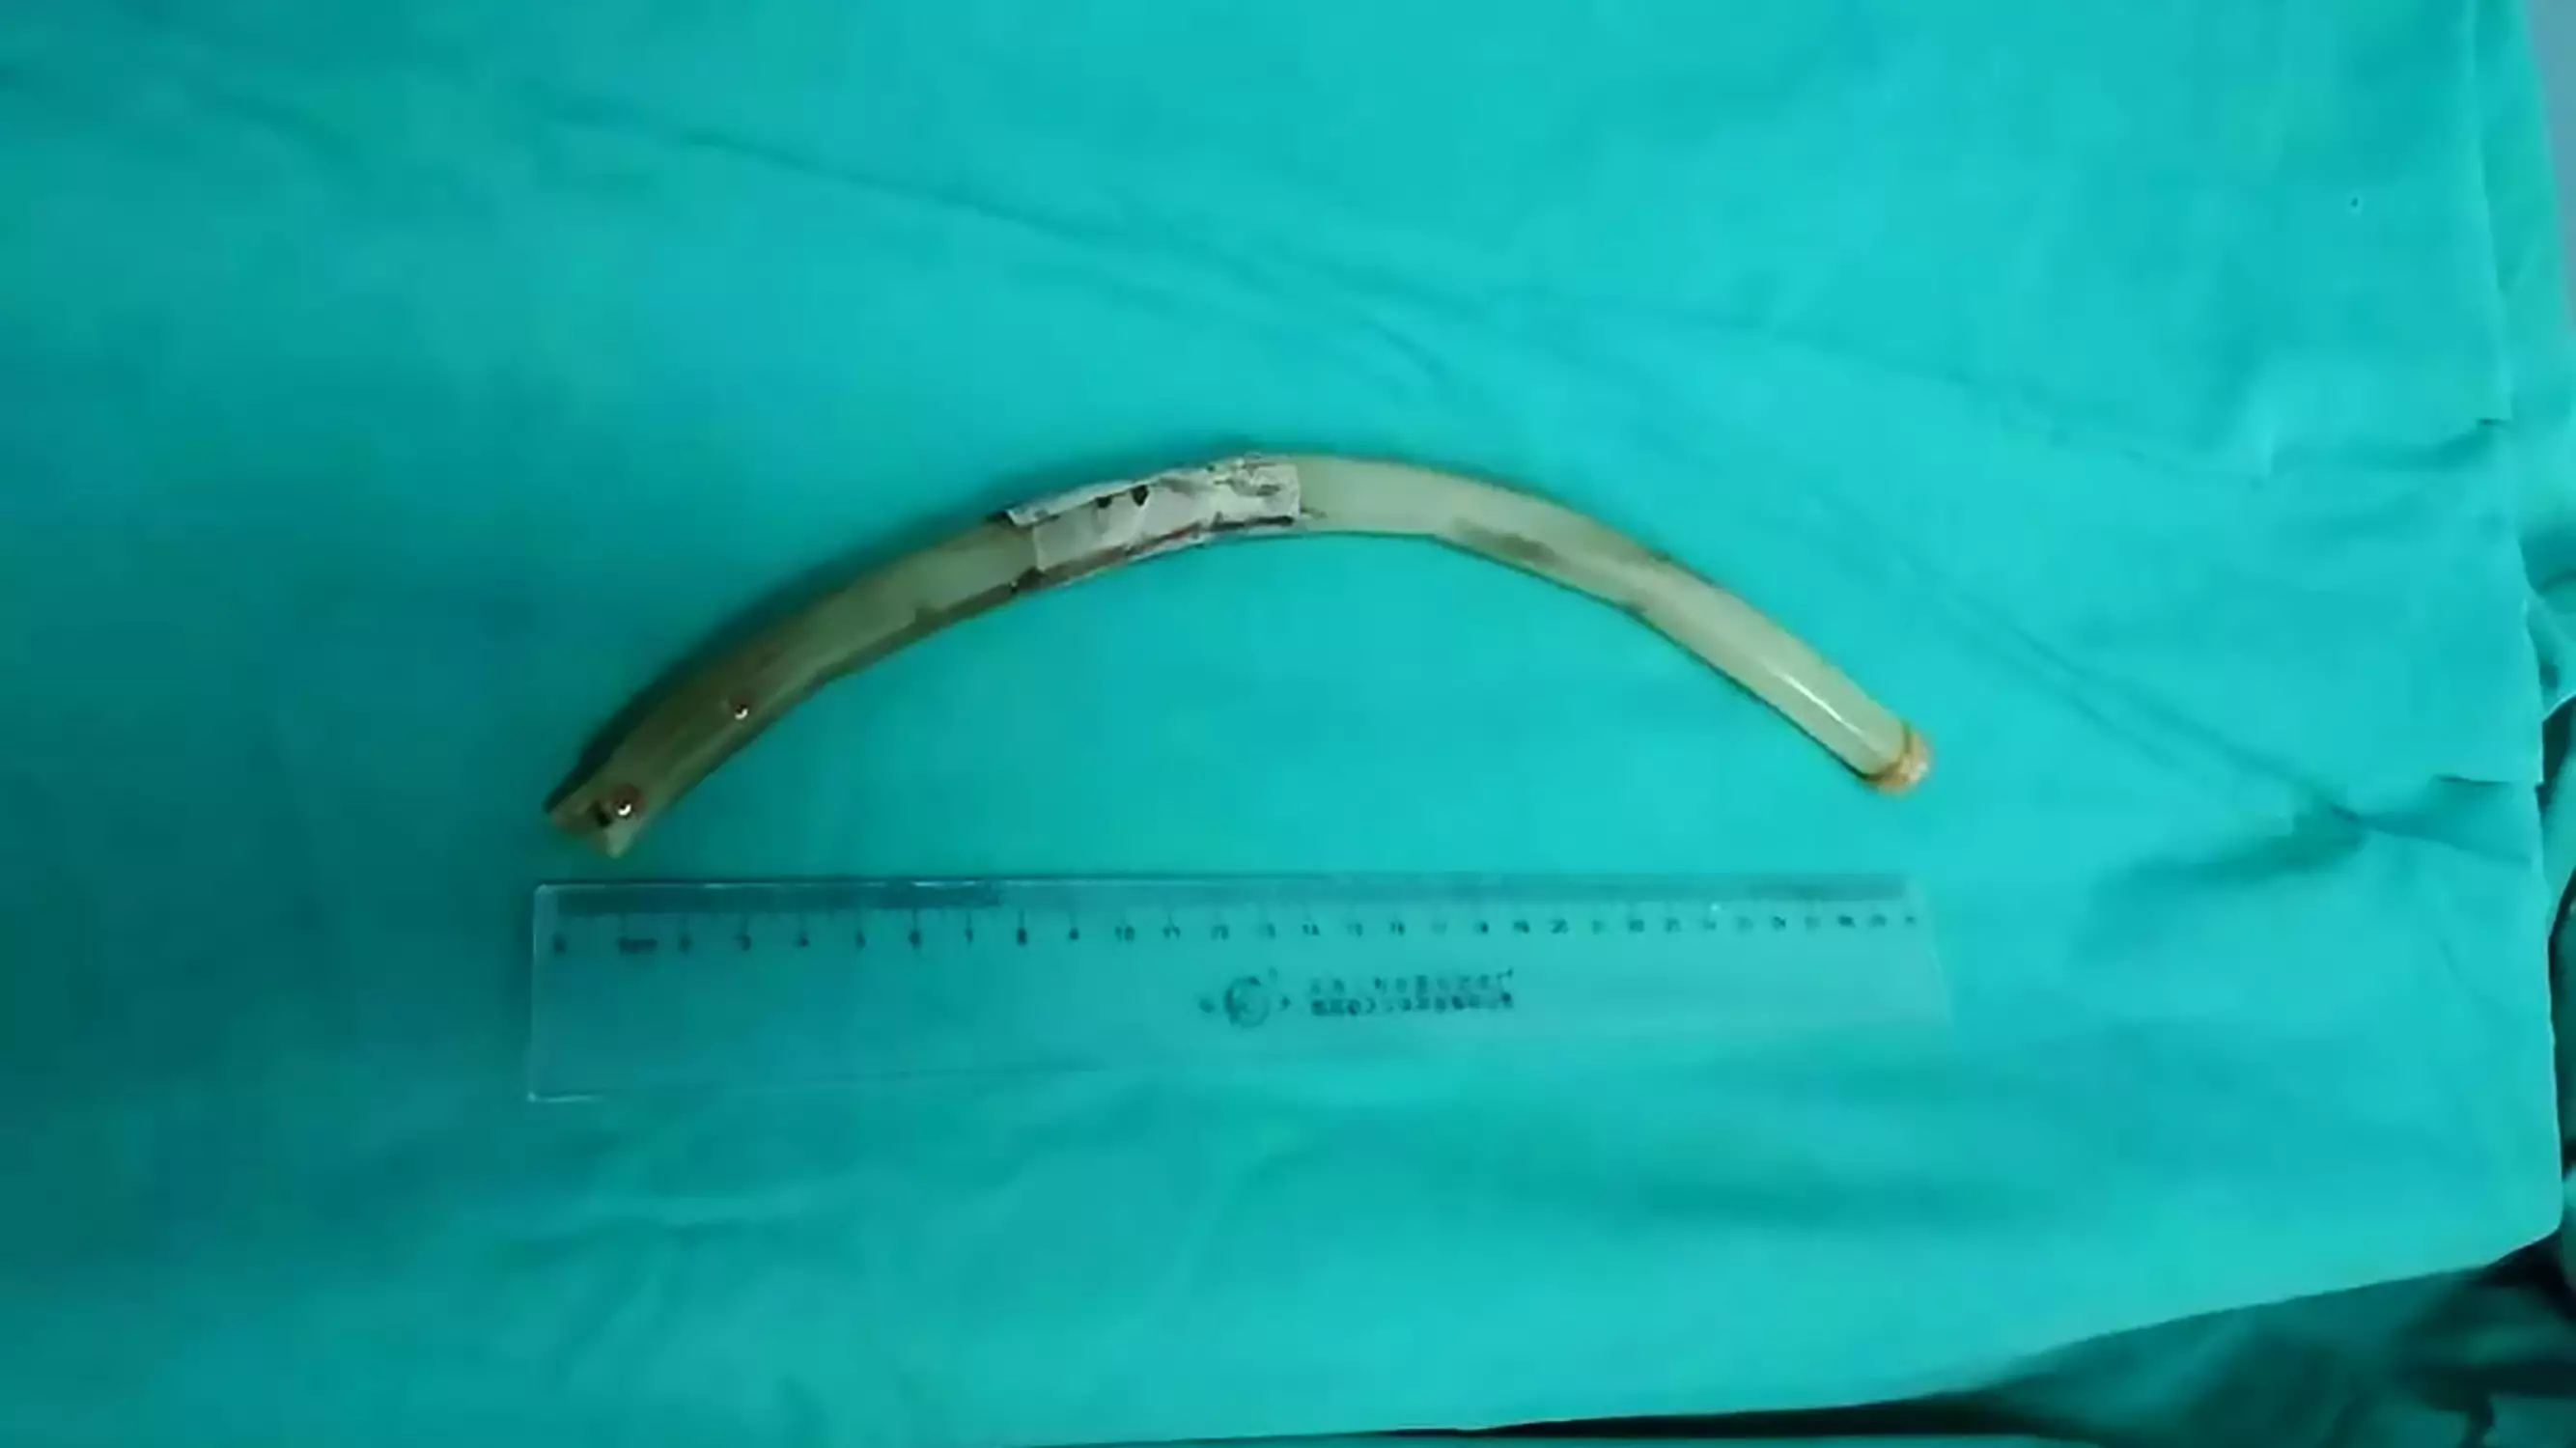 Doctors Find 12-Inch Plastic Tube Inside Woman Who Claimed She Swallowed A Straw